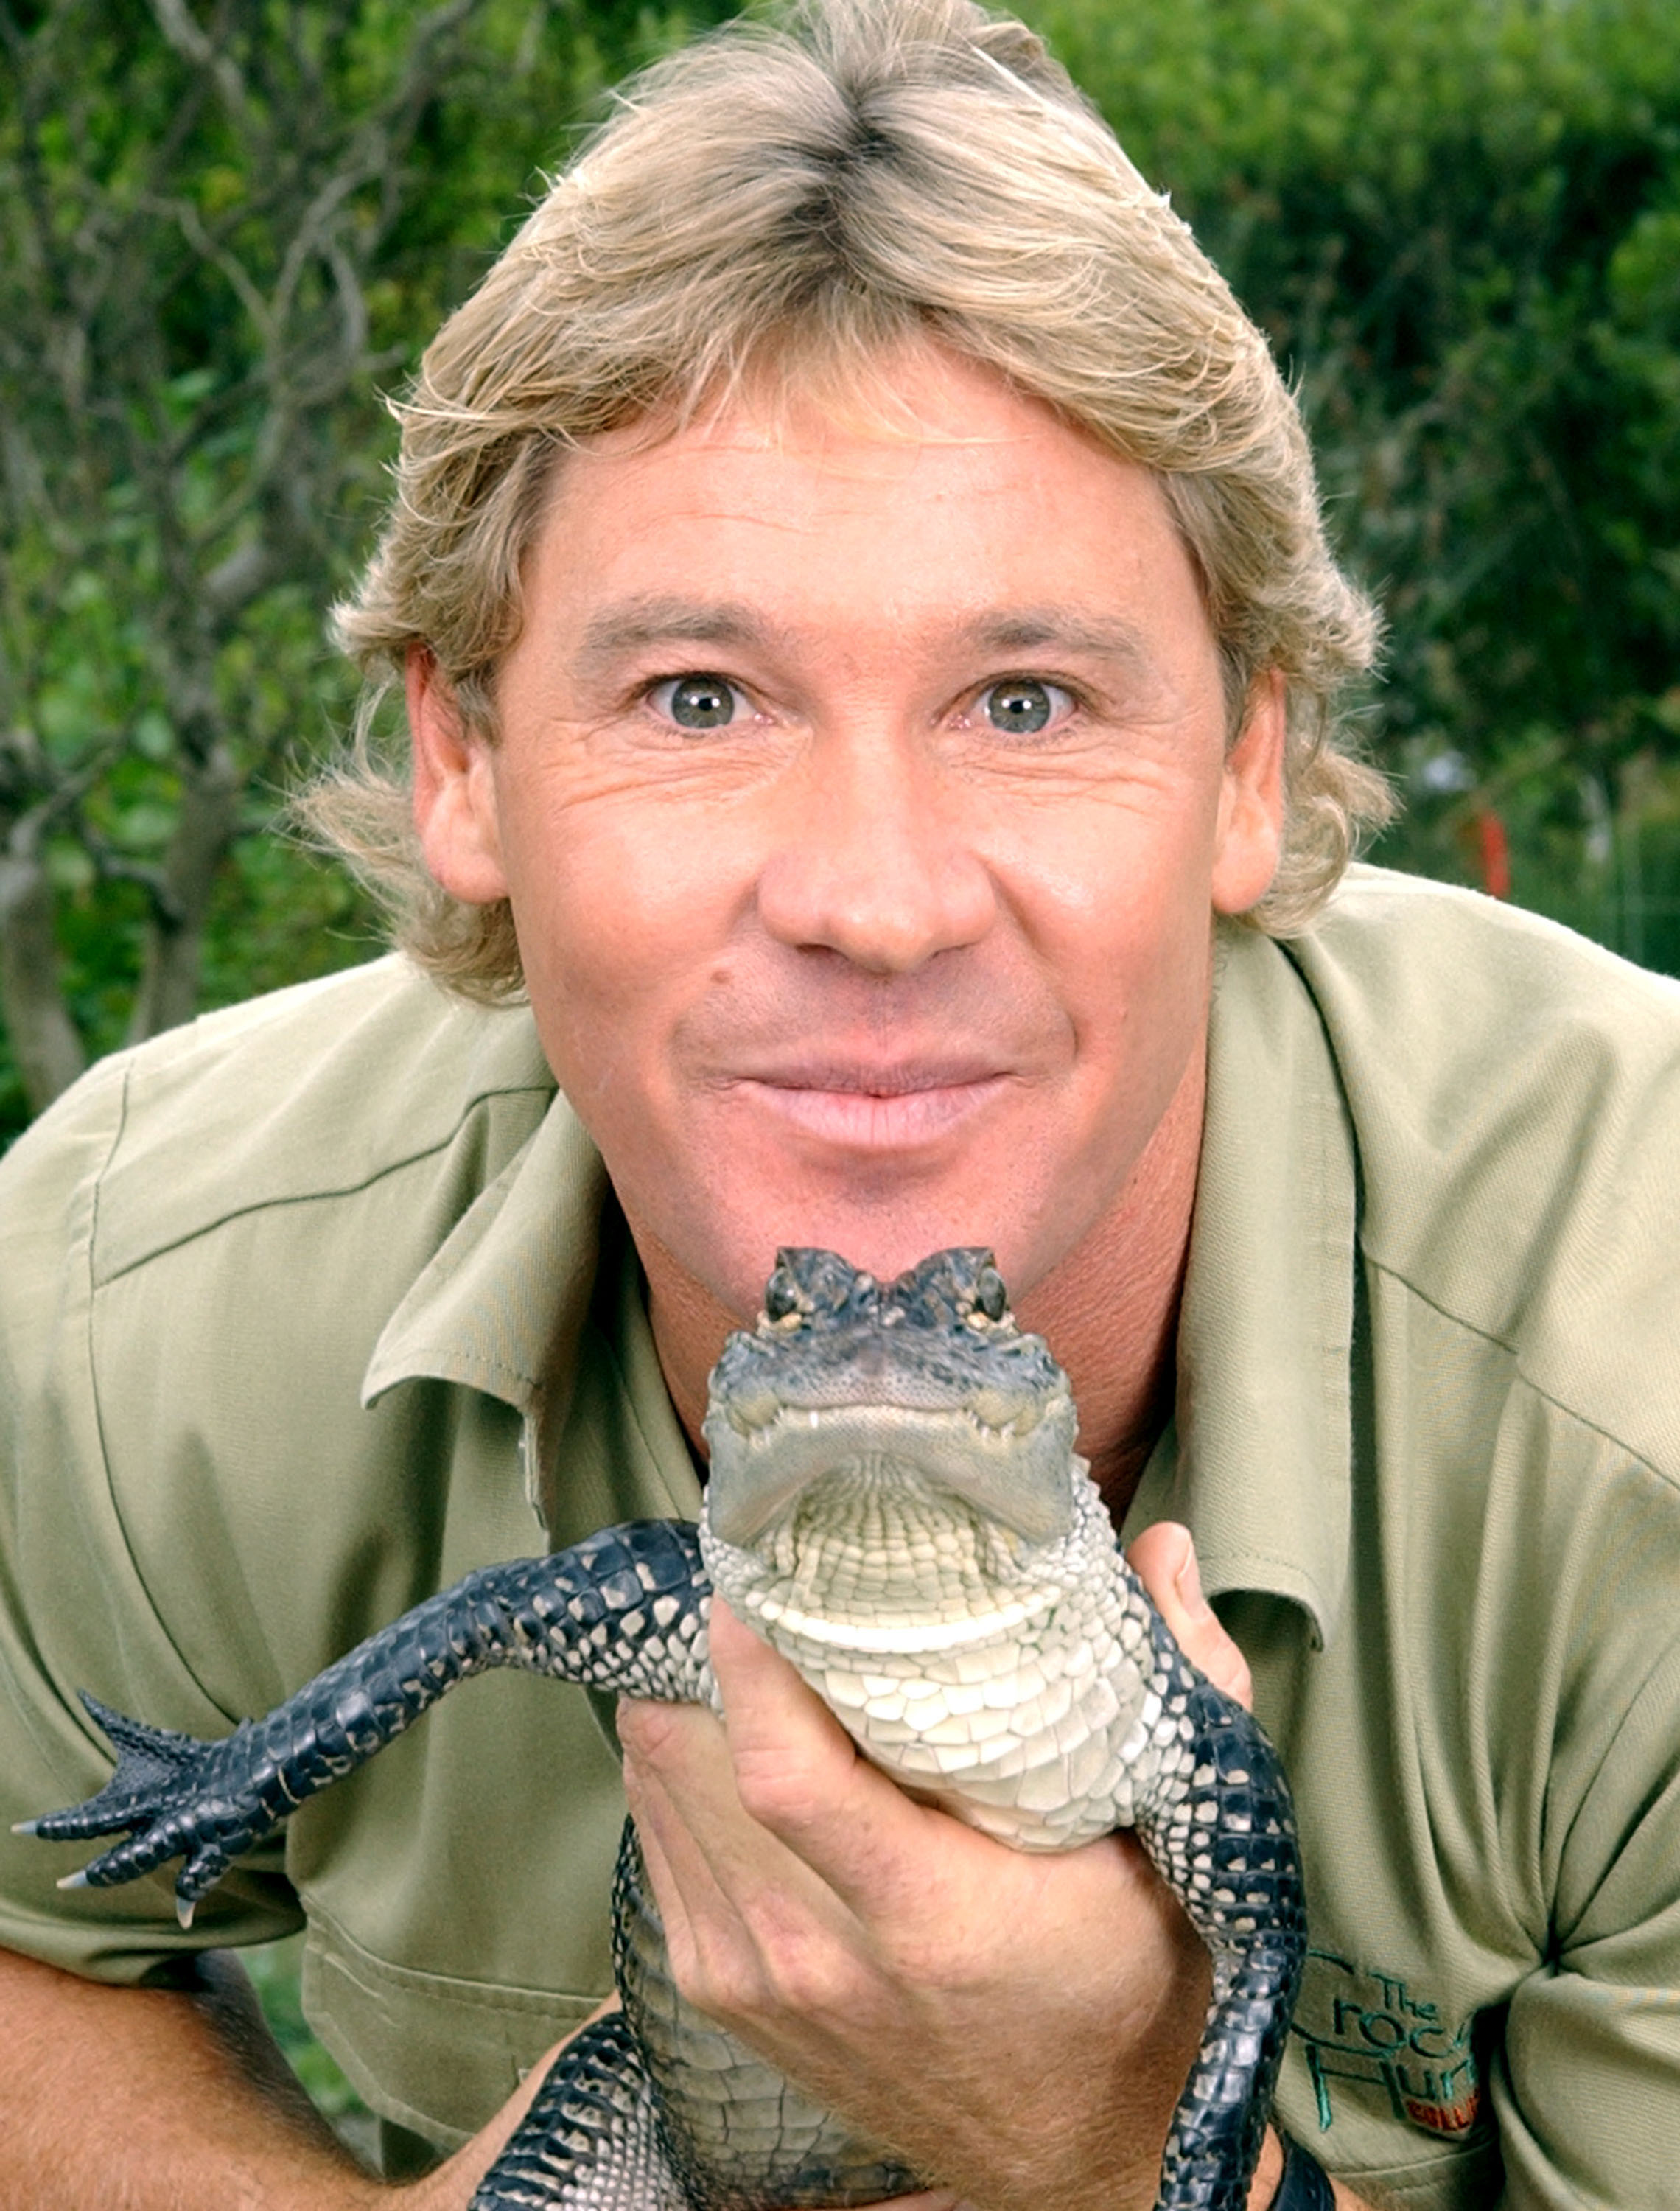 Robert Irwin's dad, Steve Irwin at the San Francisco Zoo on June 26, 2002 in San Francisco, California. | Source: Getty Images